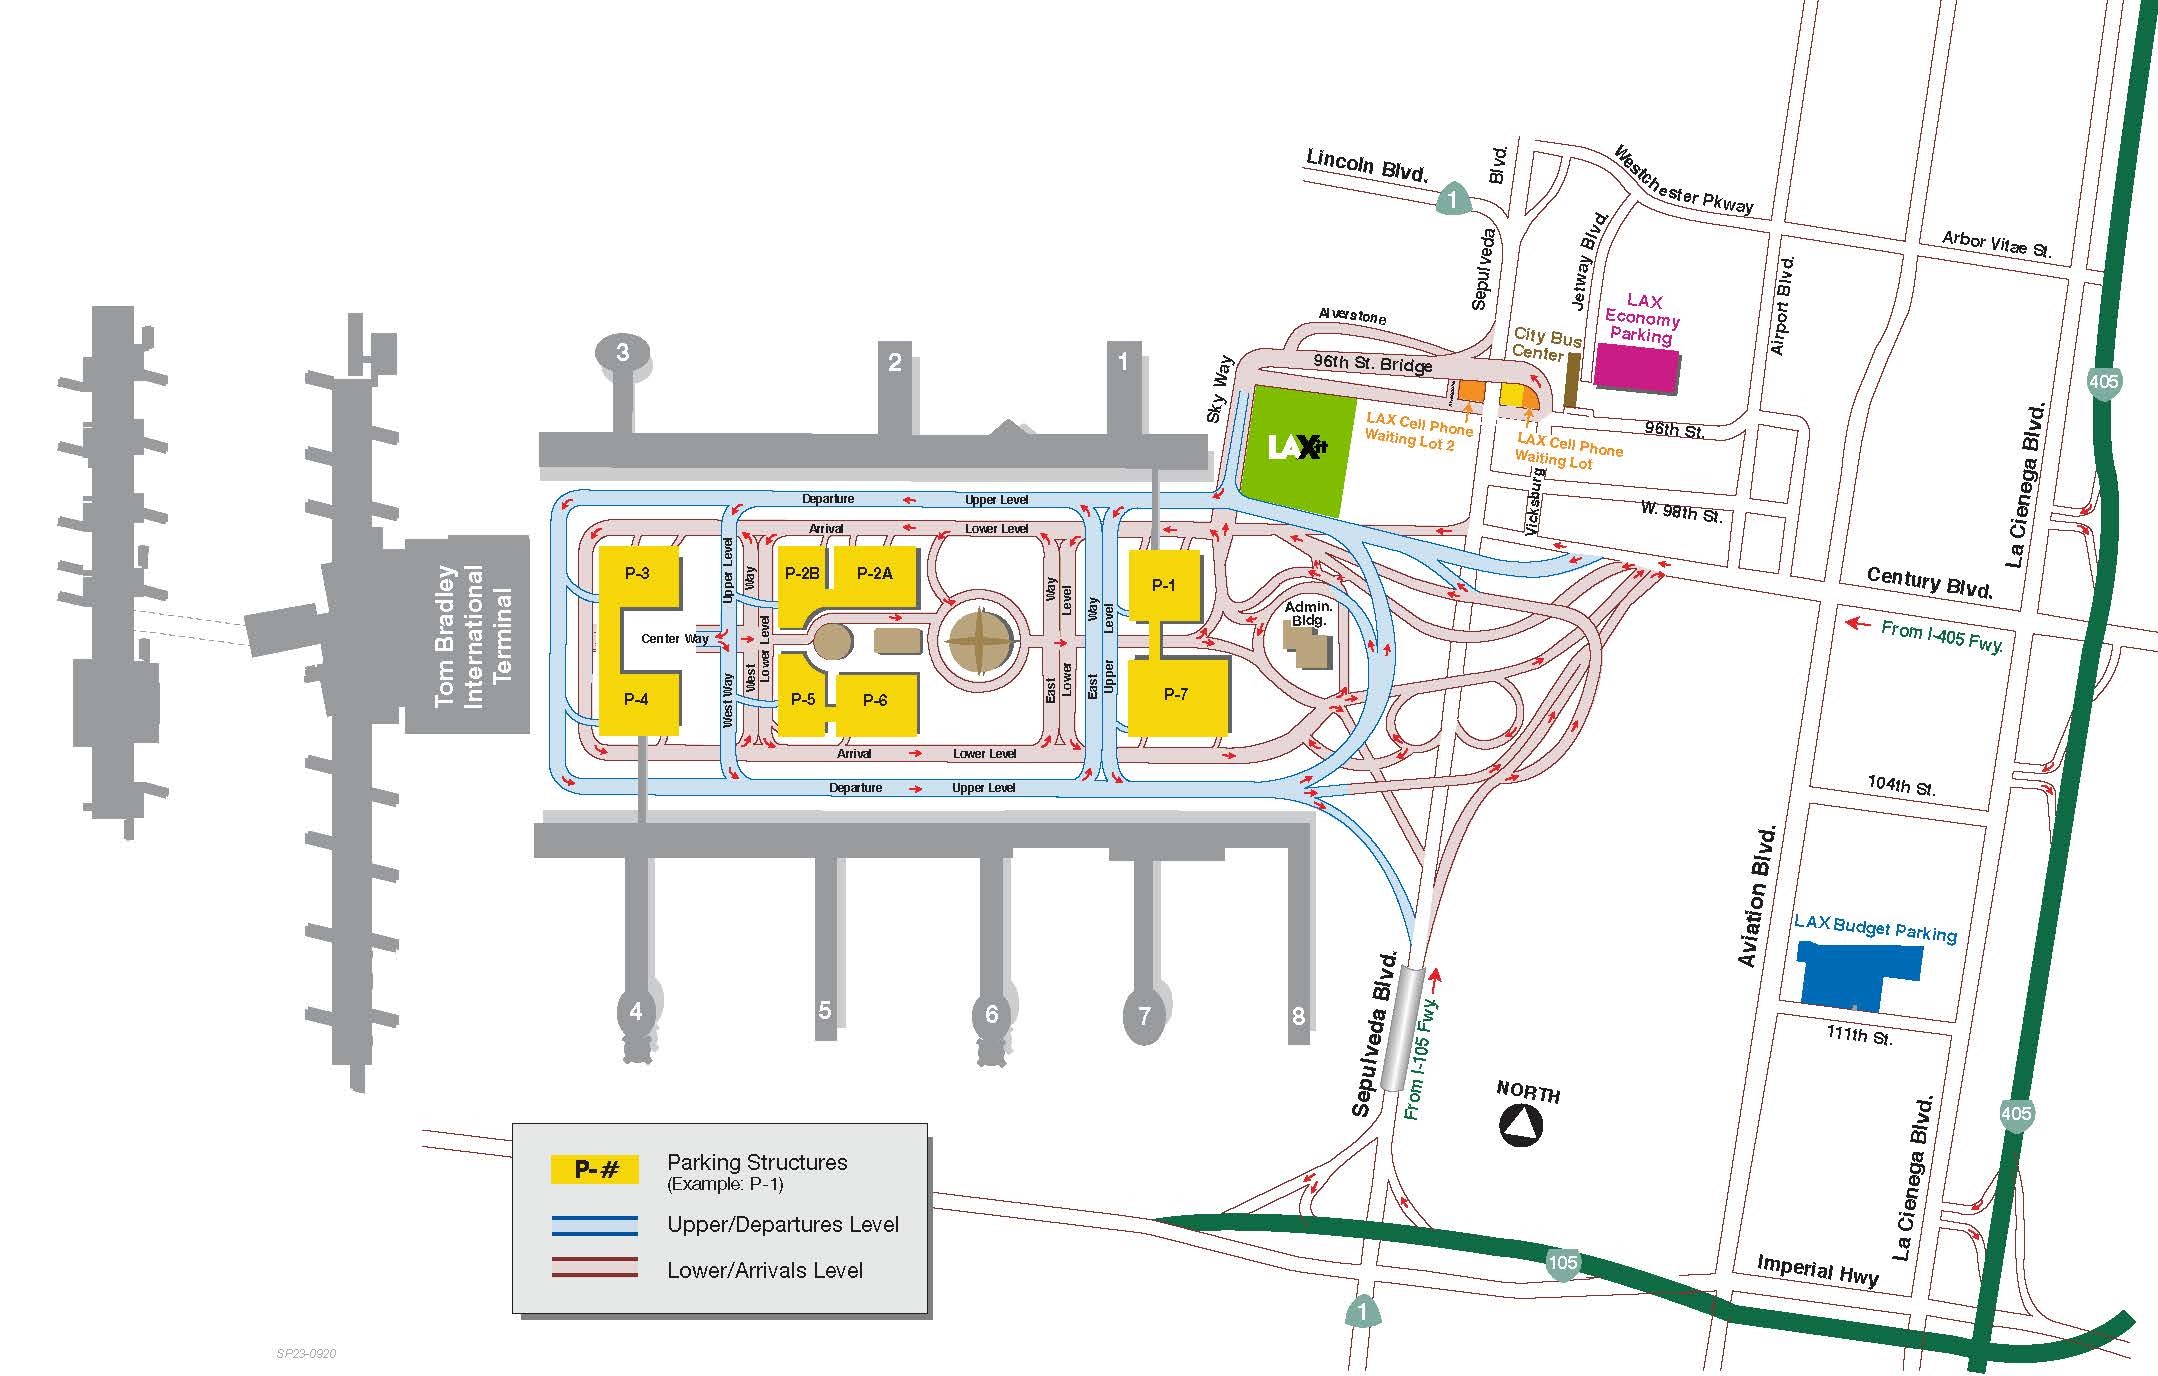 Lax Terminal Parking Map LAX Official Site | LAX Parking Information and Real Time Parking 